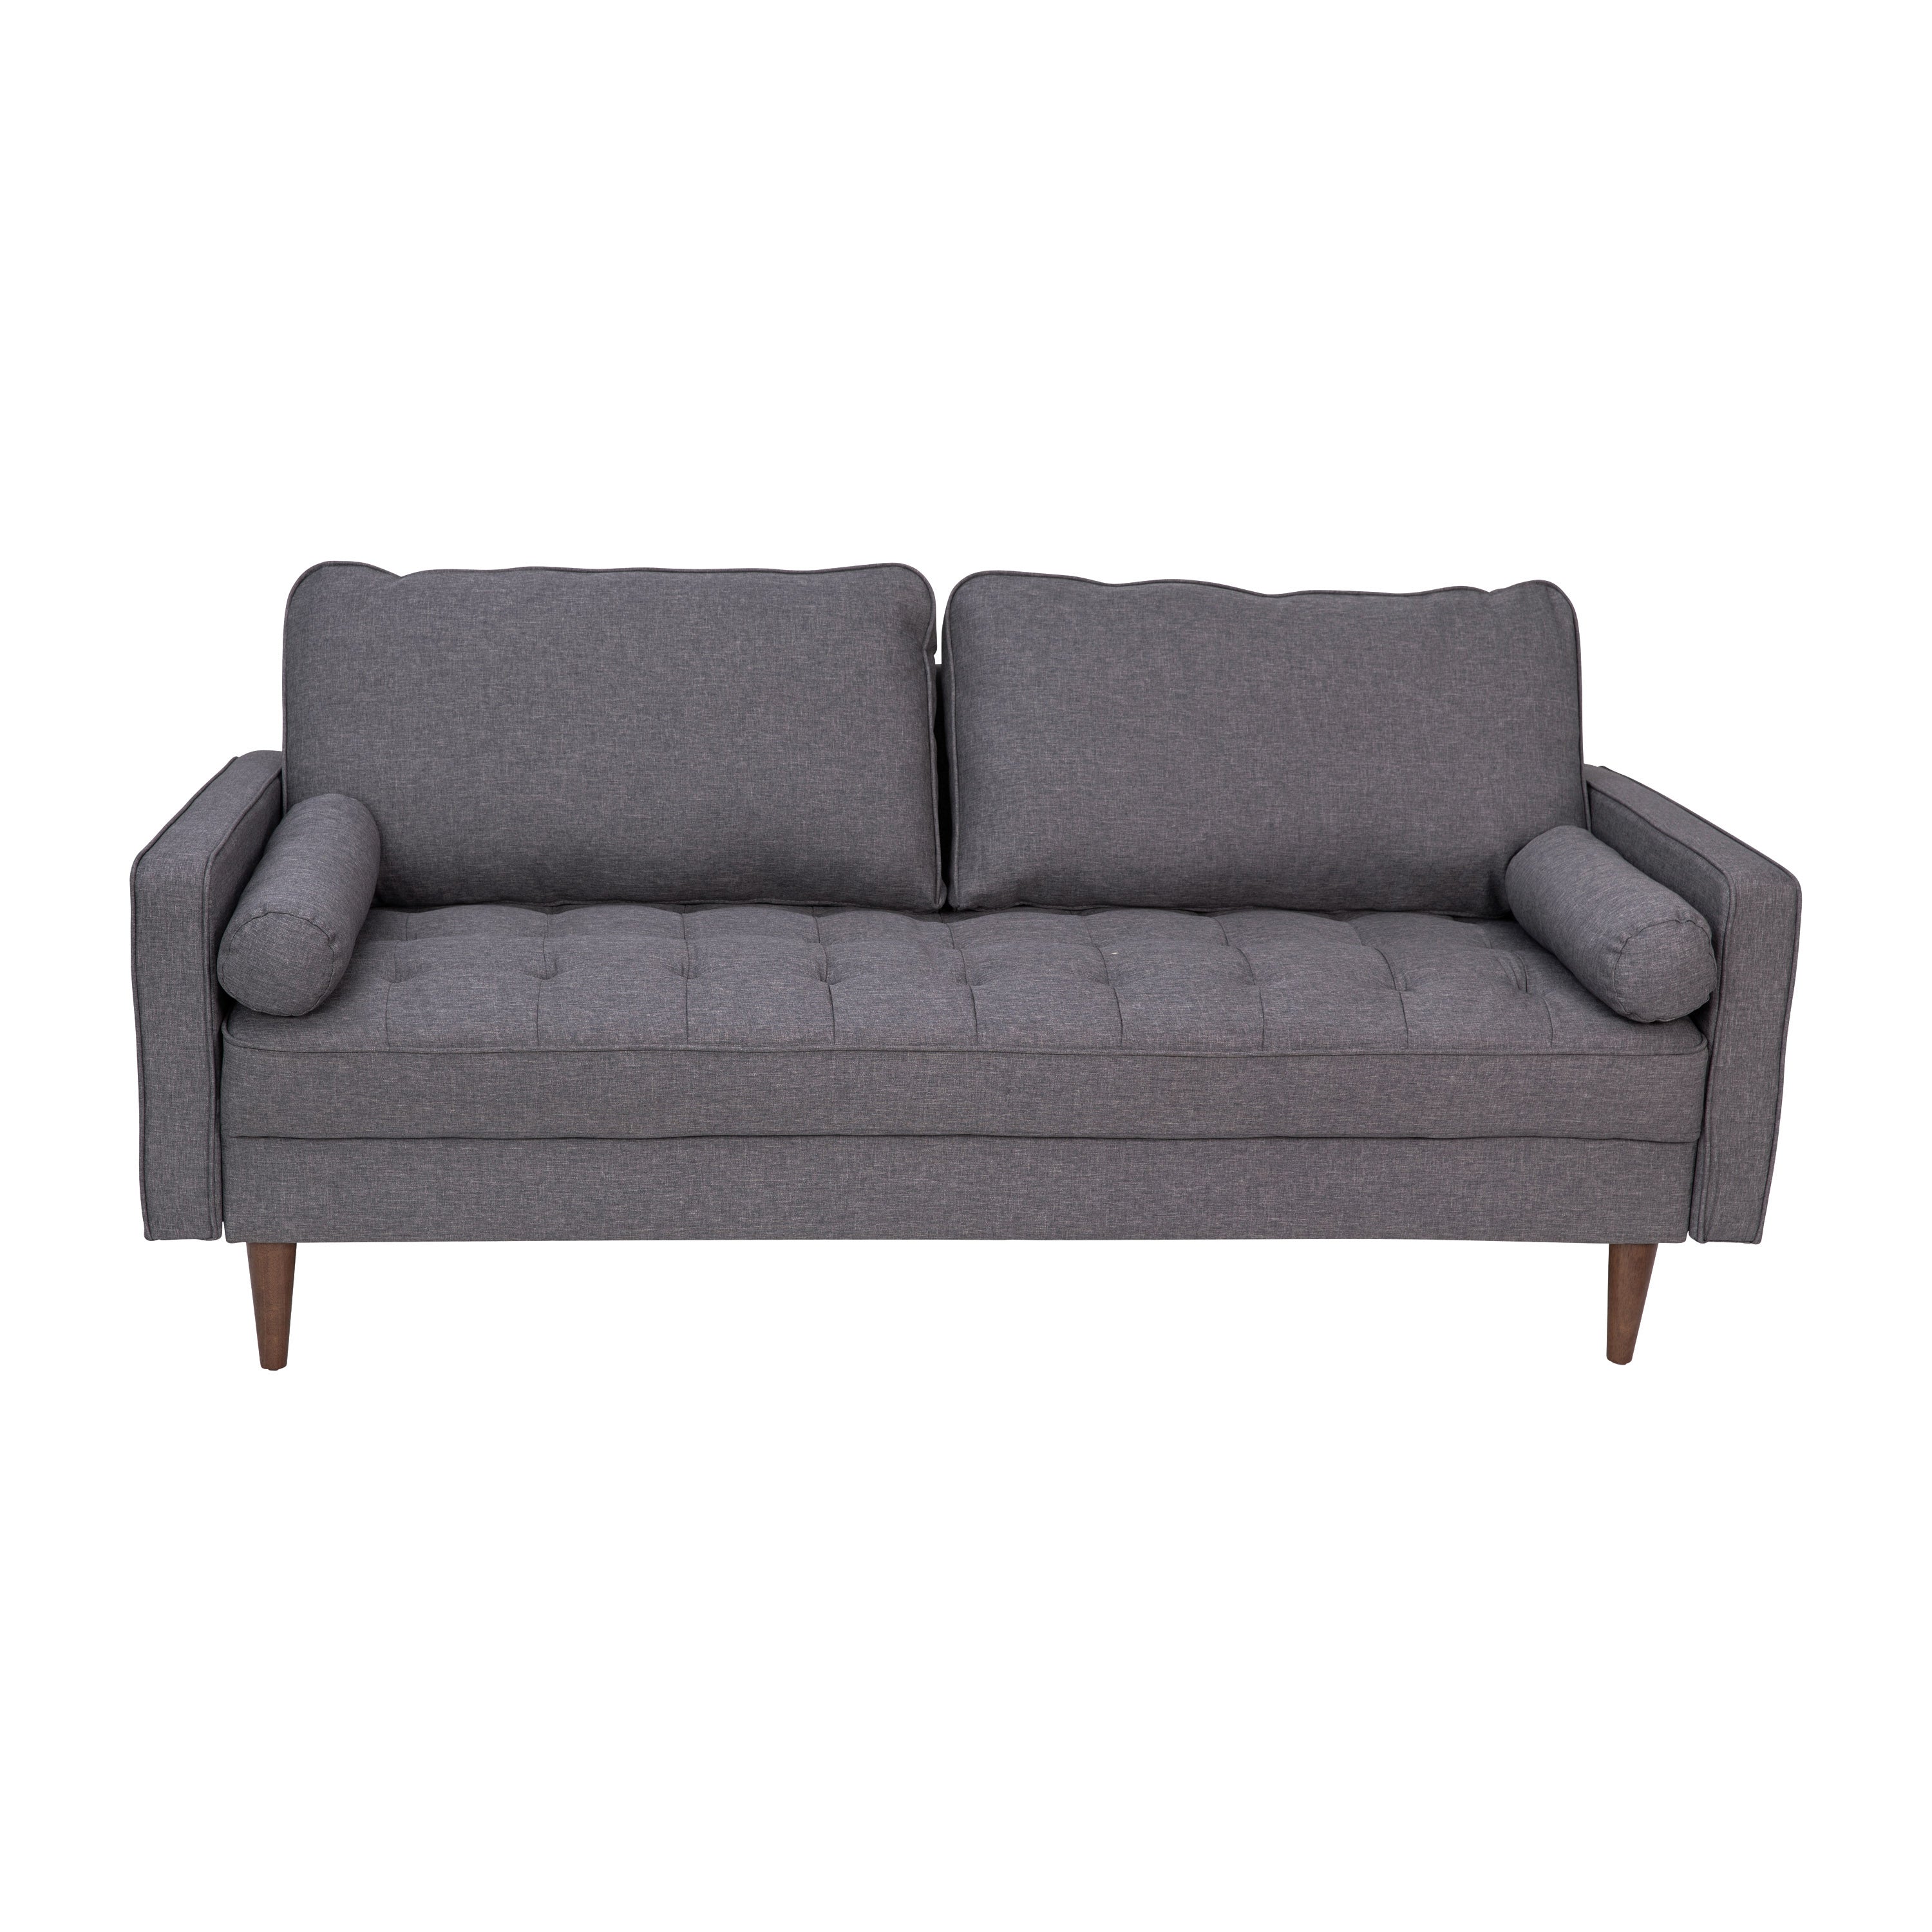 Hudson Mid-Century Modern Sofa with Tufted Upholstery & Solid Wood Legs-Sofa-Flash Furniture-Wall2Wall Furnishings